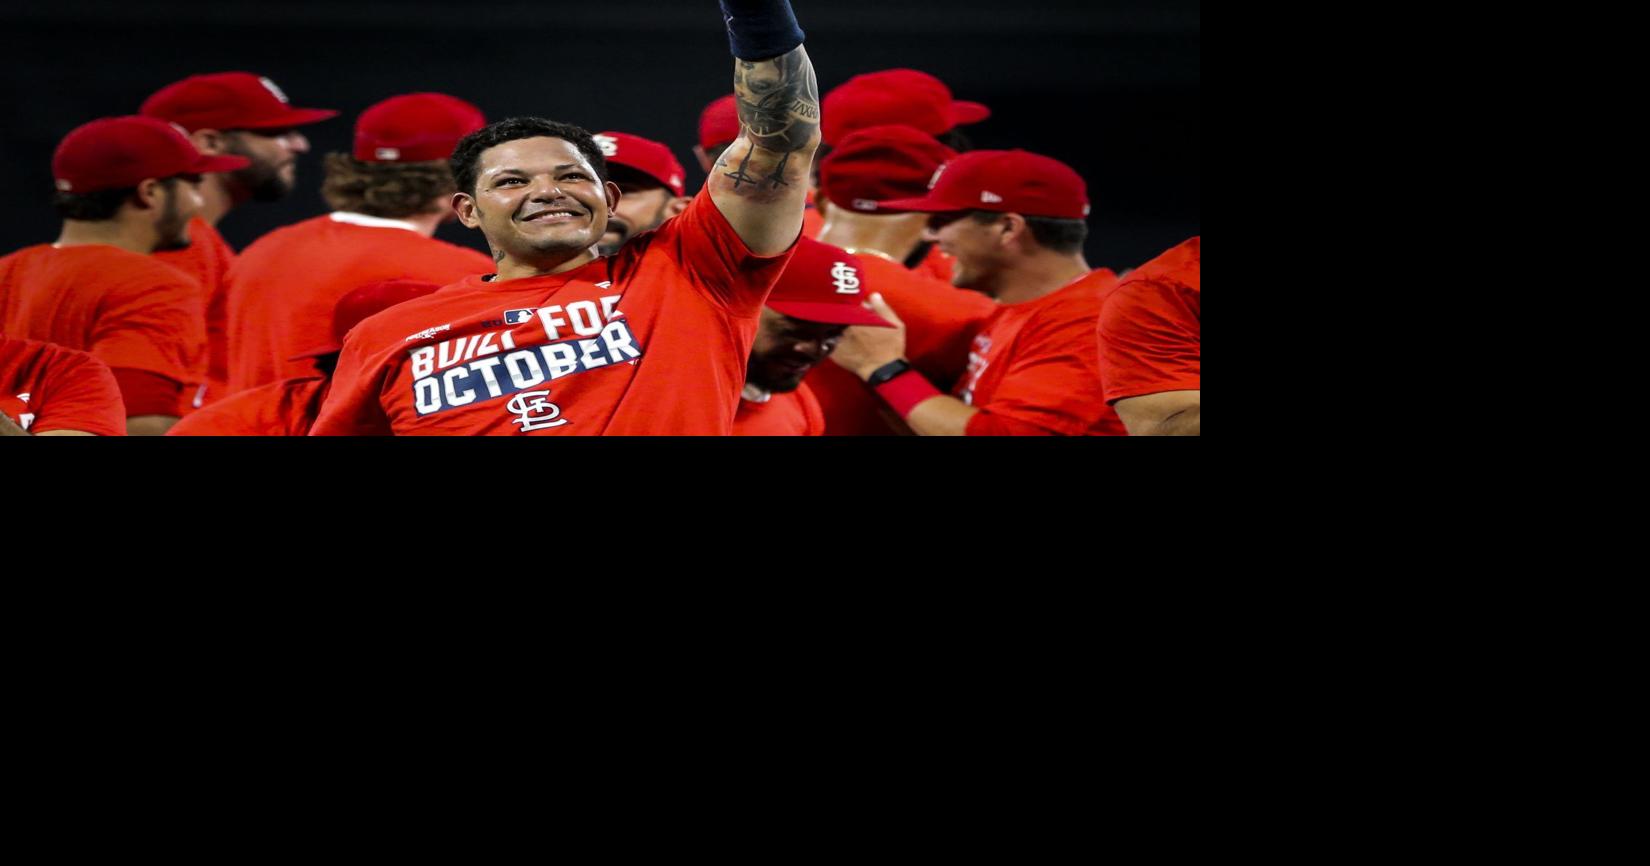 Yadier Molina's absence ranks among the strangest ones in MLB